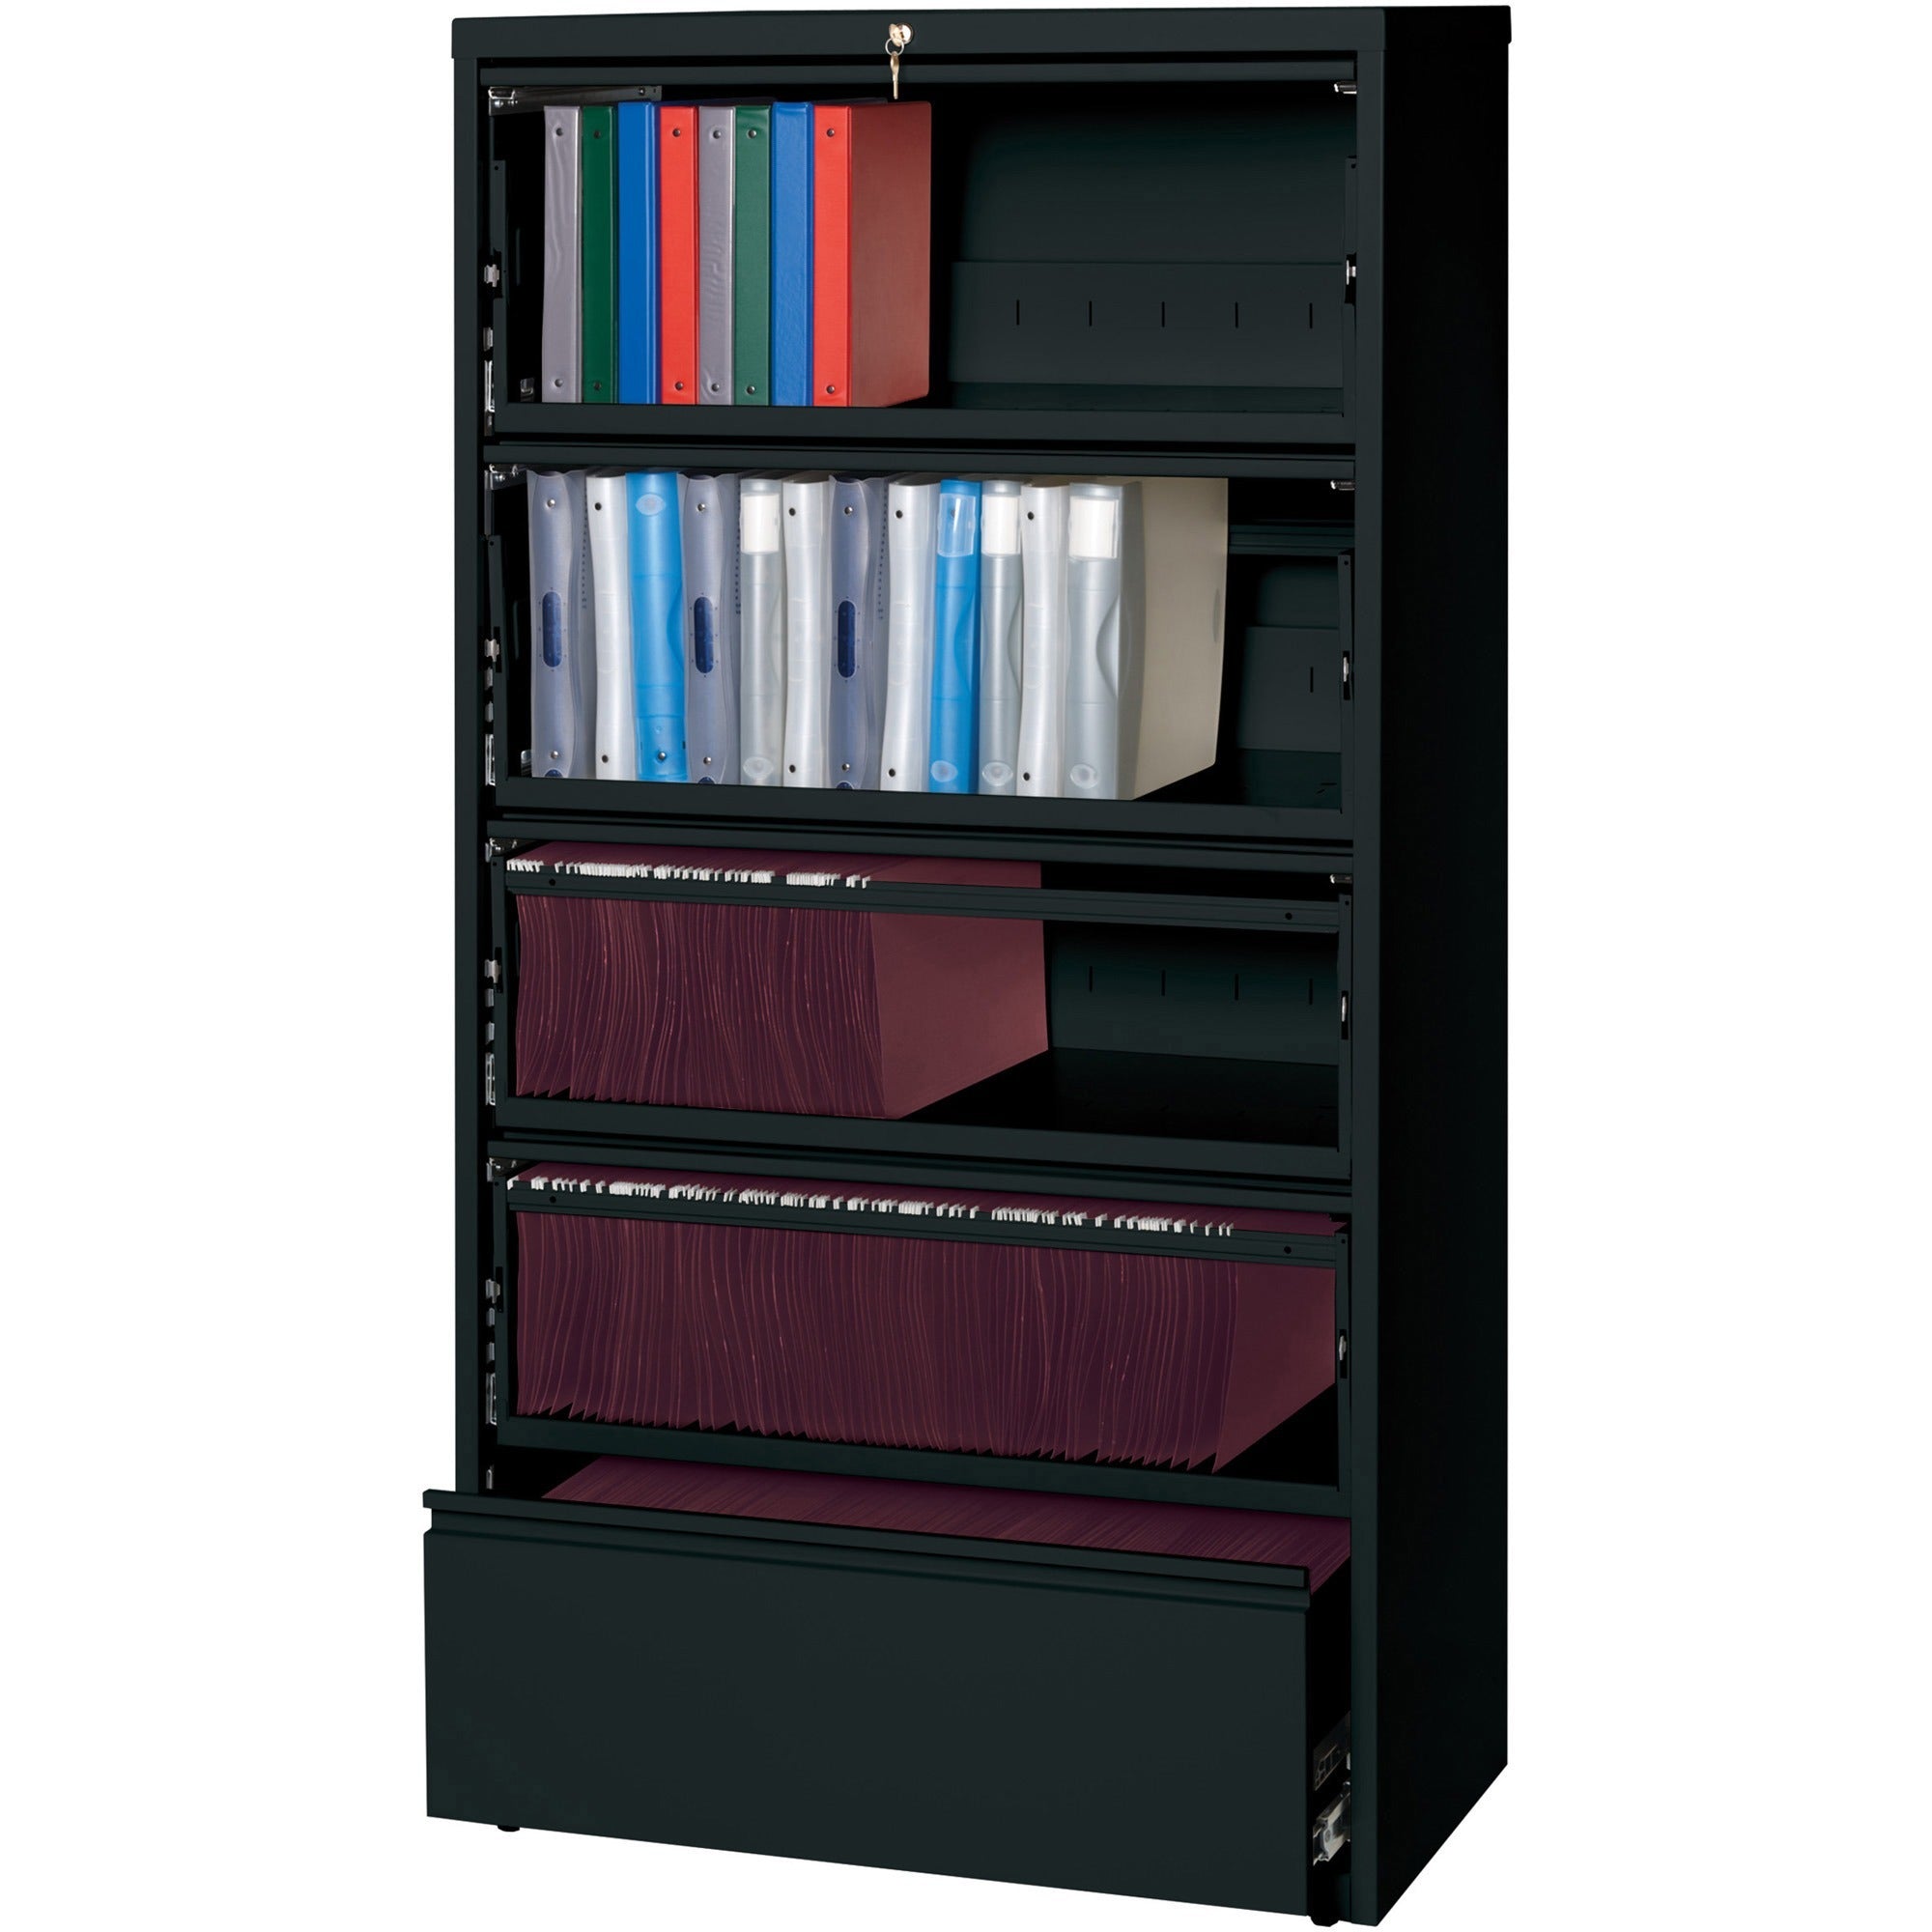 Lorell Fortress Lateral File with Roll-Out Shelf - 36" x 18.6" x 69" - 5 x Drawer(s) for File - Legal, Letter, A4 - Leveling Glide, Ball-bearing Suspension, Interlocking, Heavy Duty, Recessed Handle - Black - Steel - Recycled - 